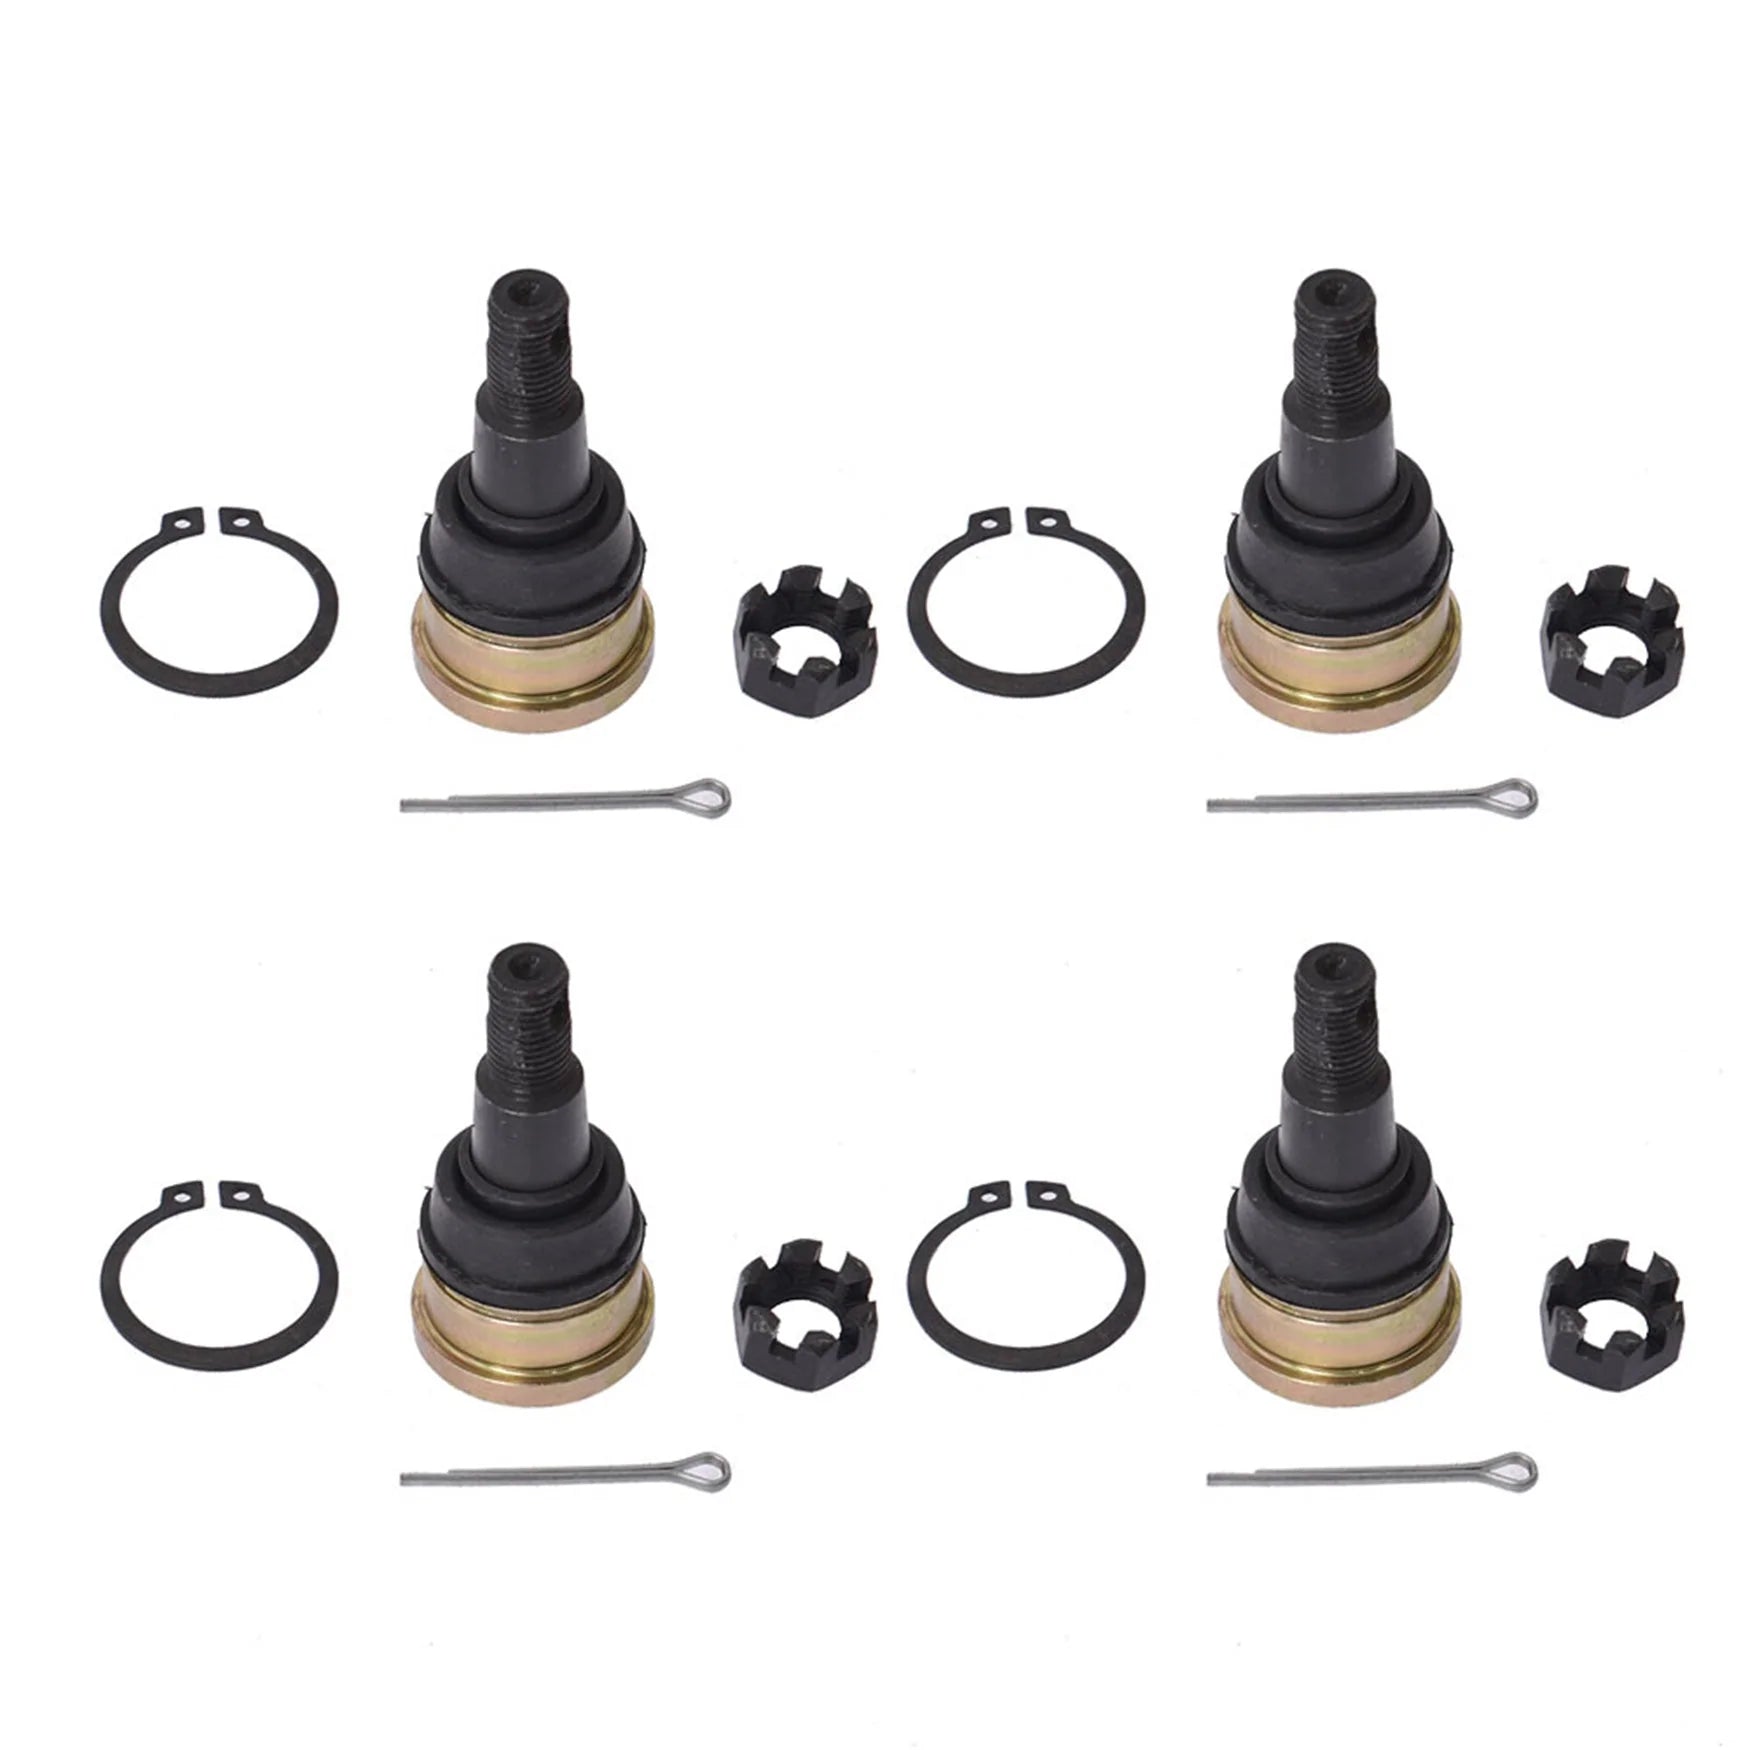 Front Lower Suspension Arm Ball Joints Set Replacement for 2003-2006 Polaris 500 Predator (4) LAB WORK MOTO